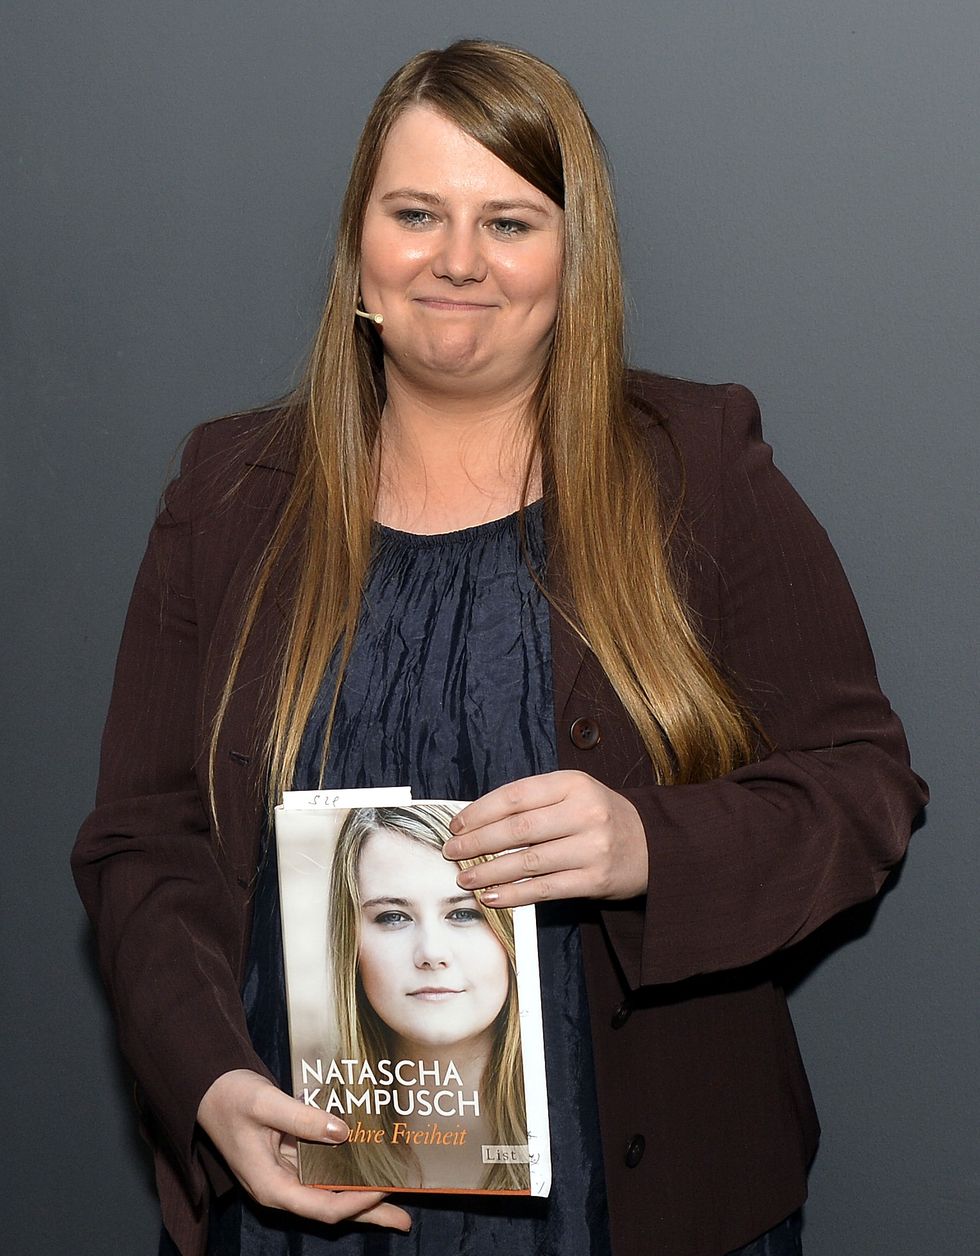 Real-life 'Room' hostage Natascha Kampusch still lives in the bunker she was held hostage in